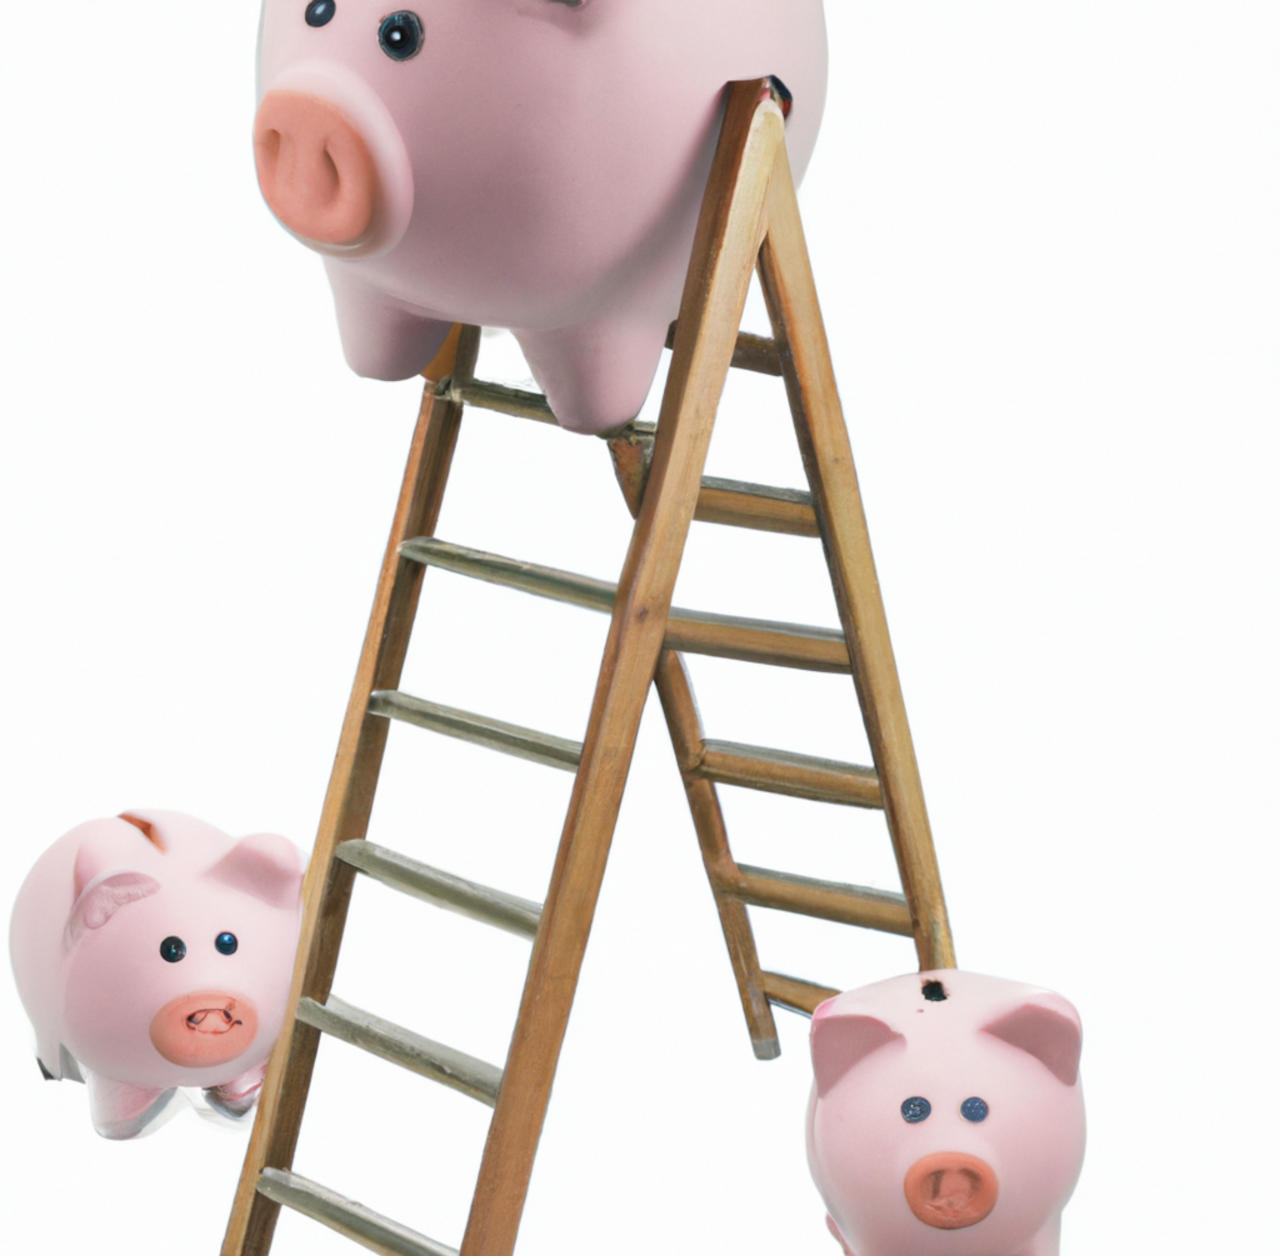 Piggy Banks climbing ladder, make your money work for you.